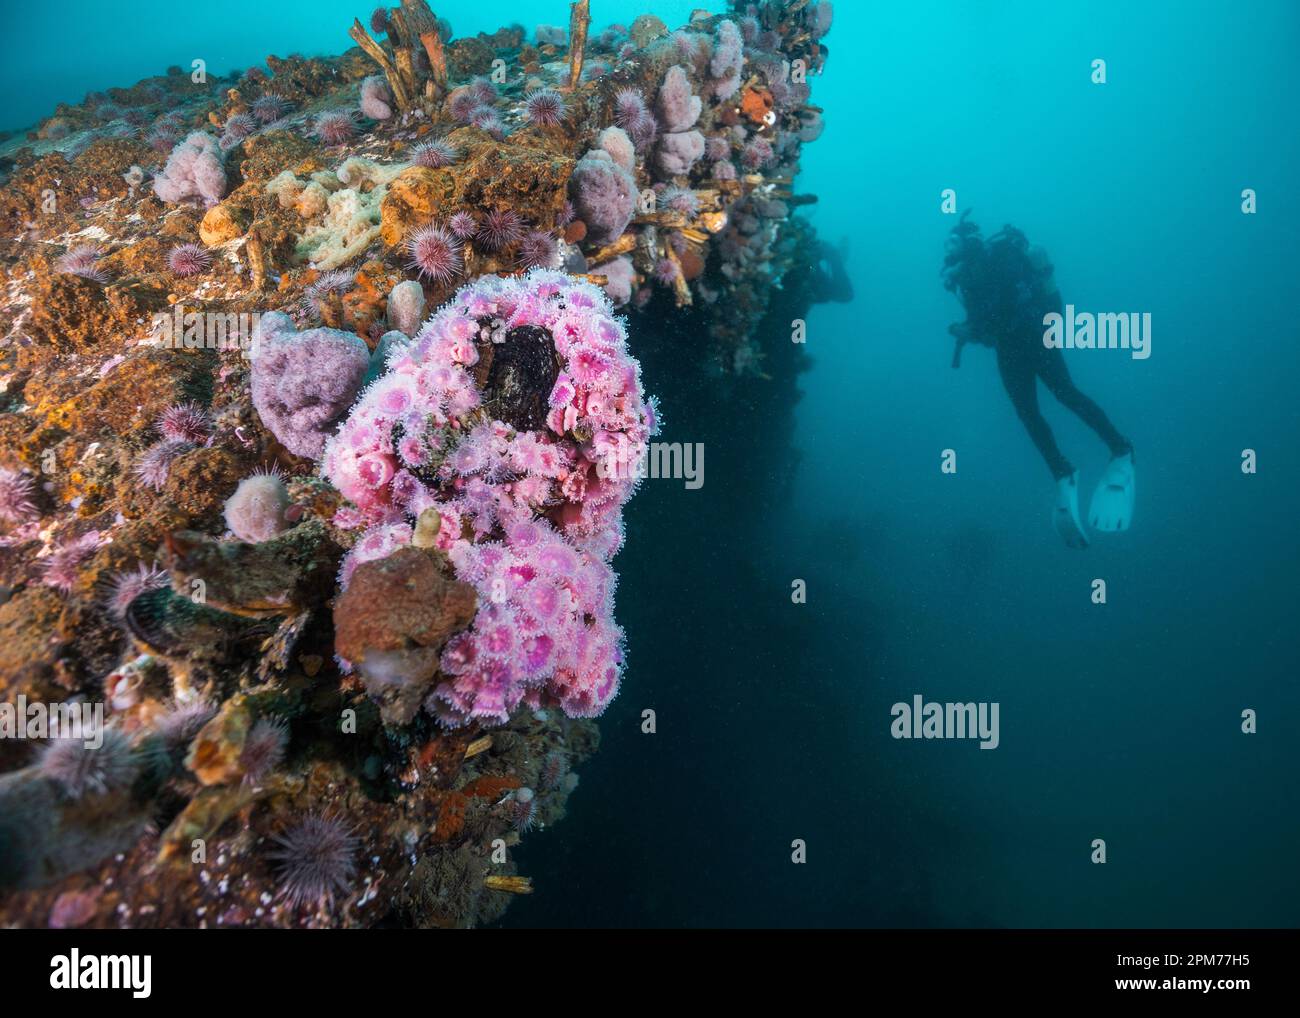 Close-up of a shipwreck underwater covered in coral and other sea life with a diver silhouette in the background Stock Photo